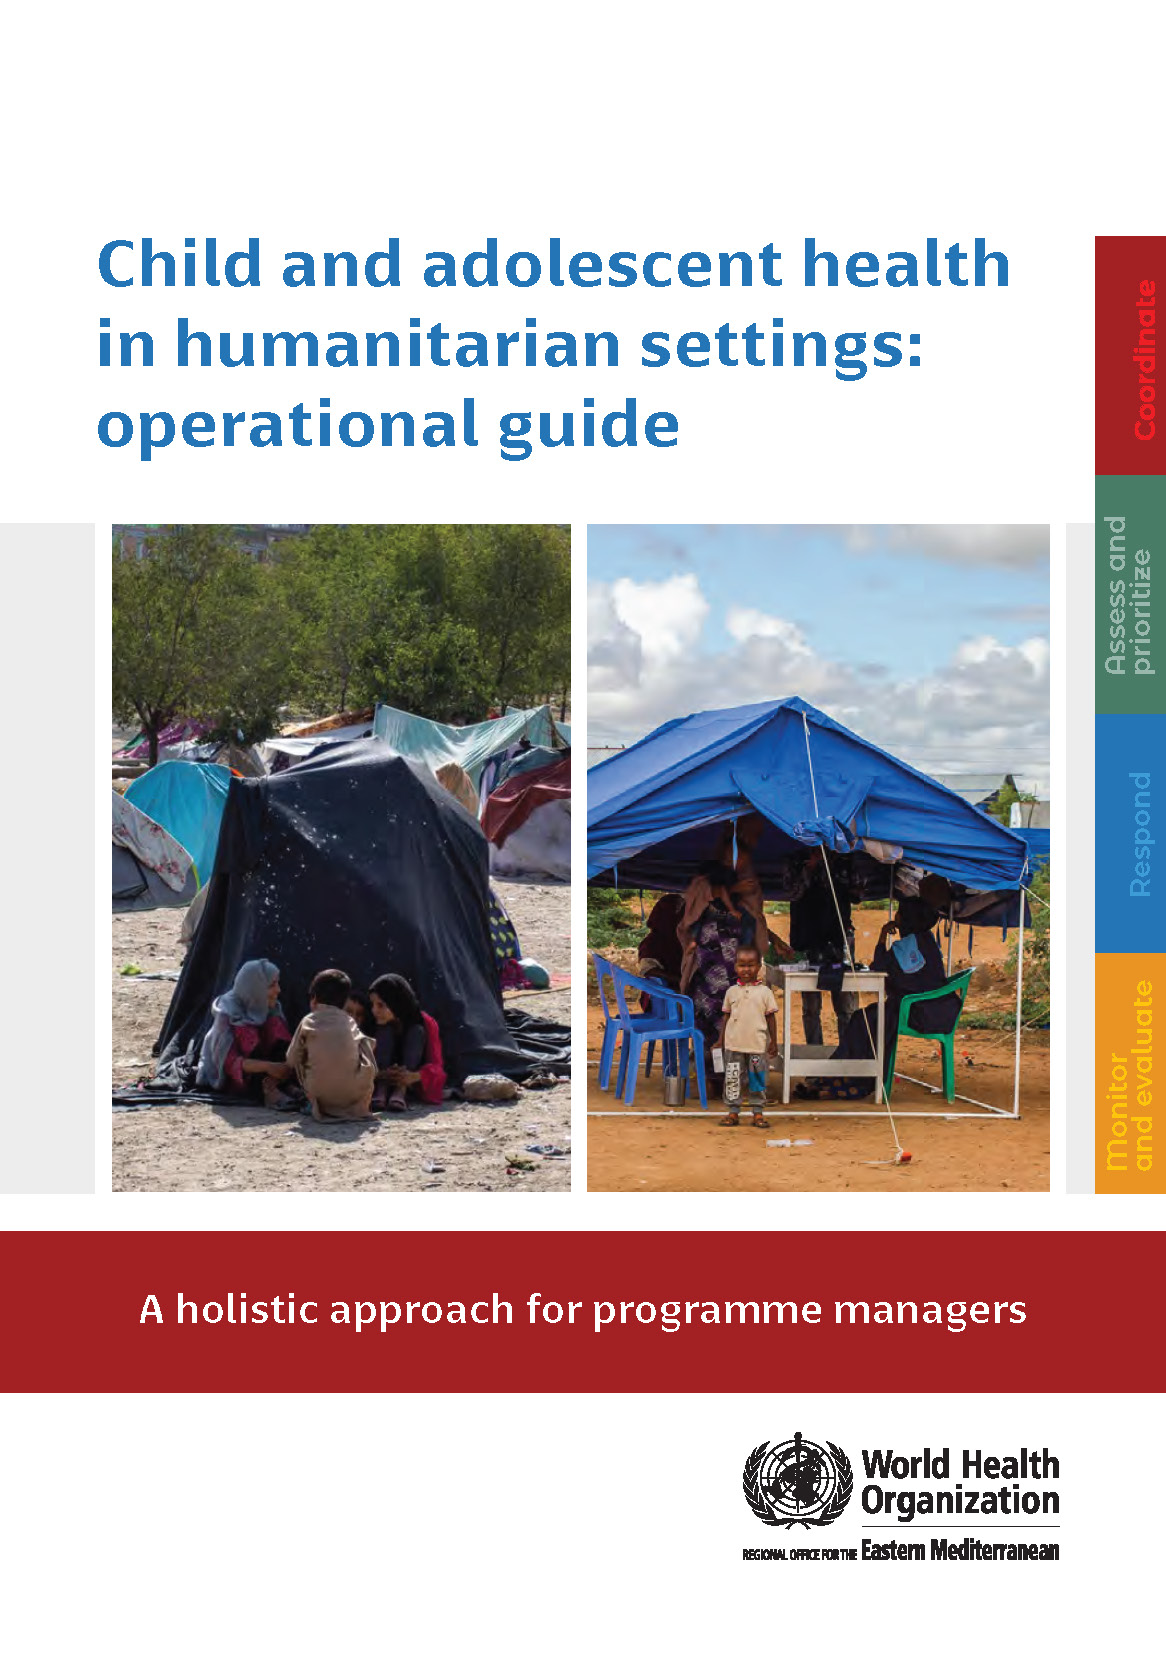 Child and adolescent health in humanitarian settings: operational guide: a holistic approach for programme managers